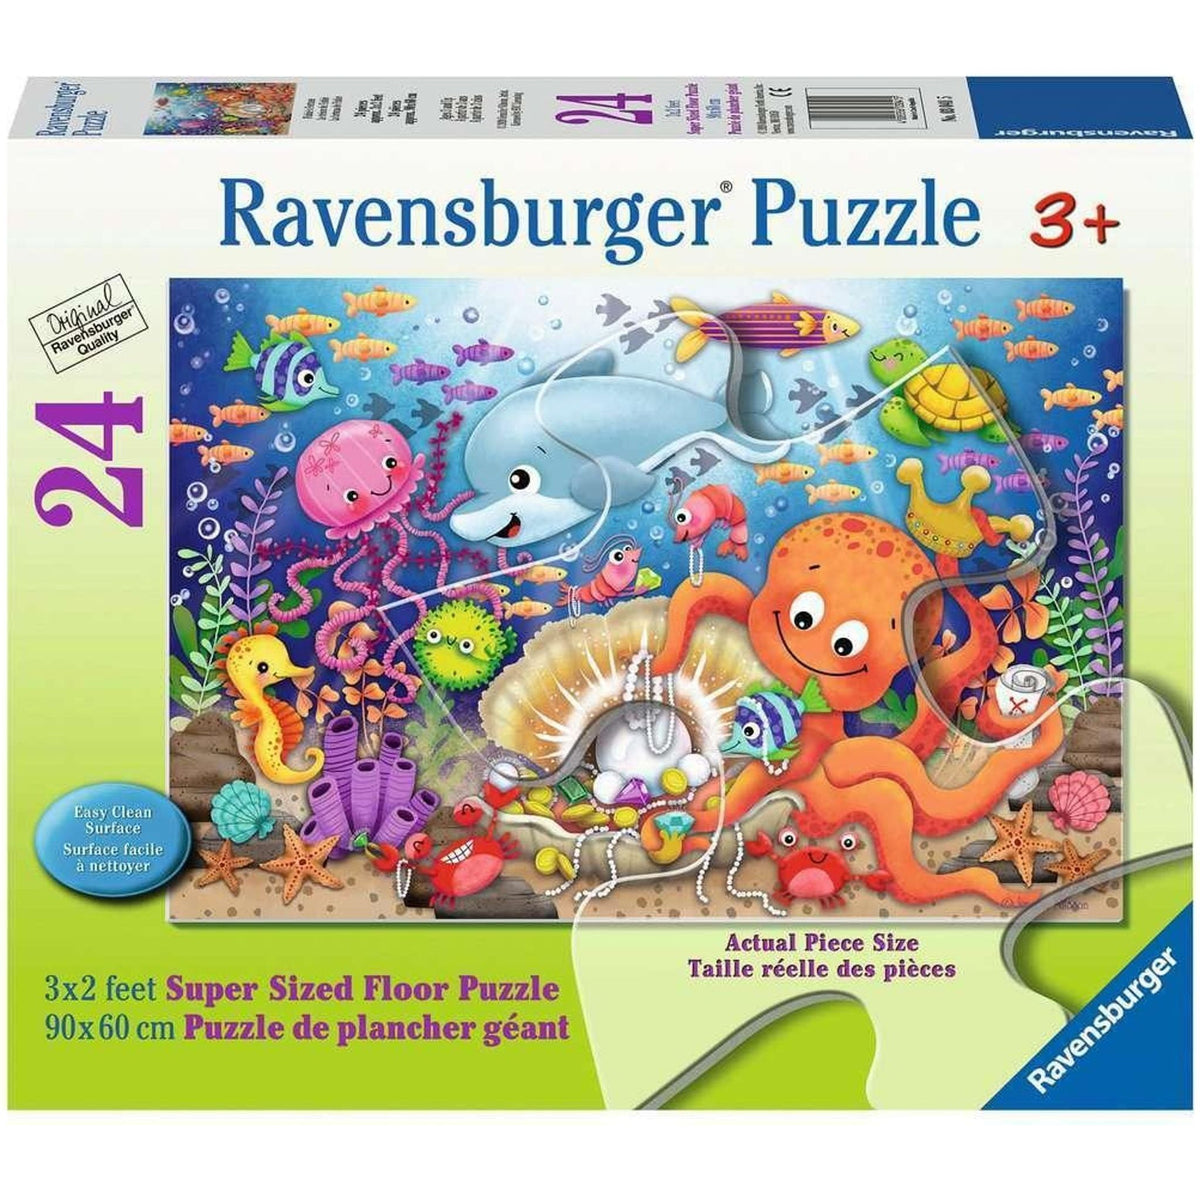 Ravensburger - Fishies Fortune 24 Piece Puzzle - Toybox Tales